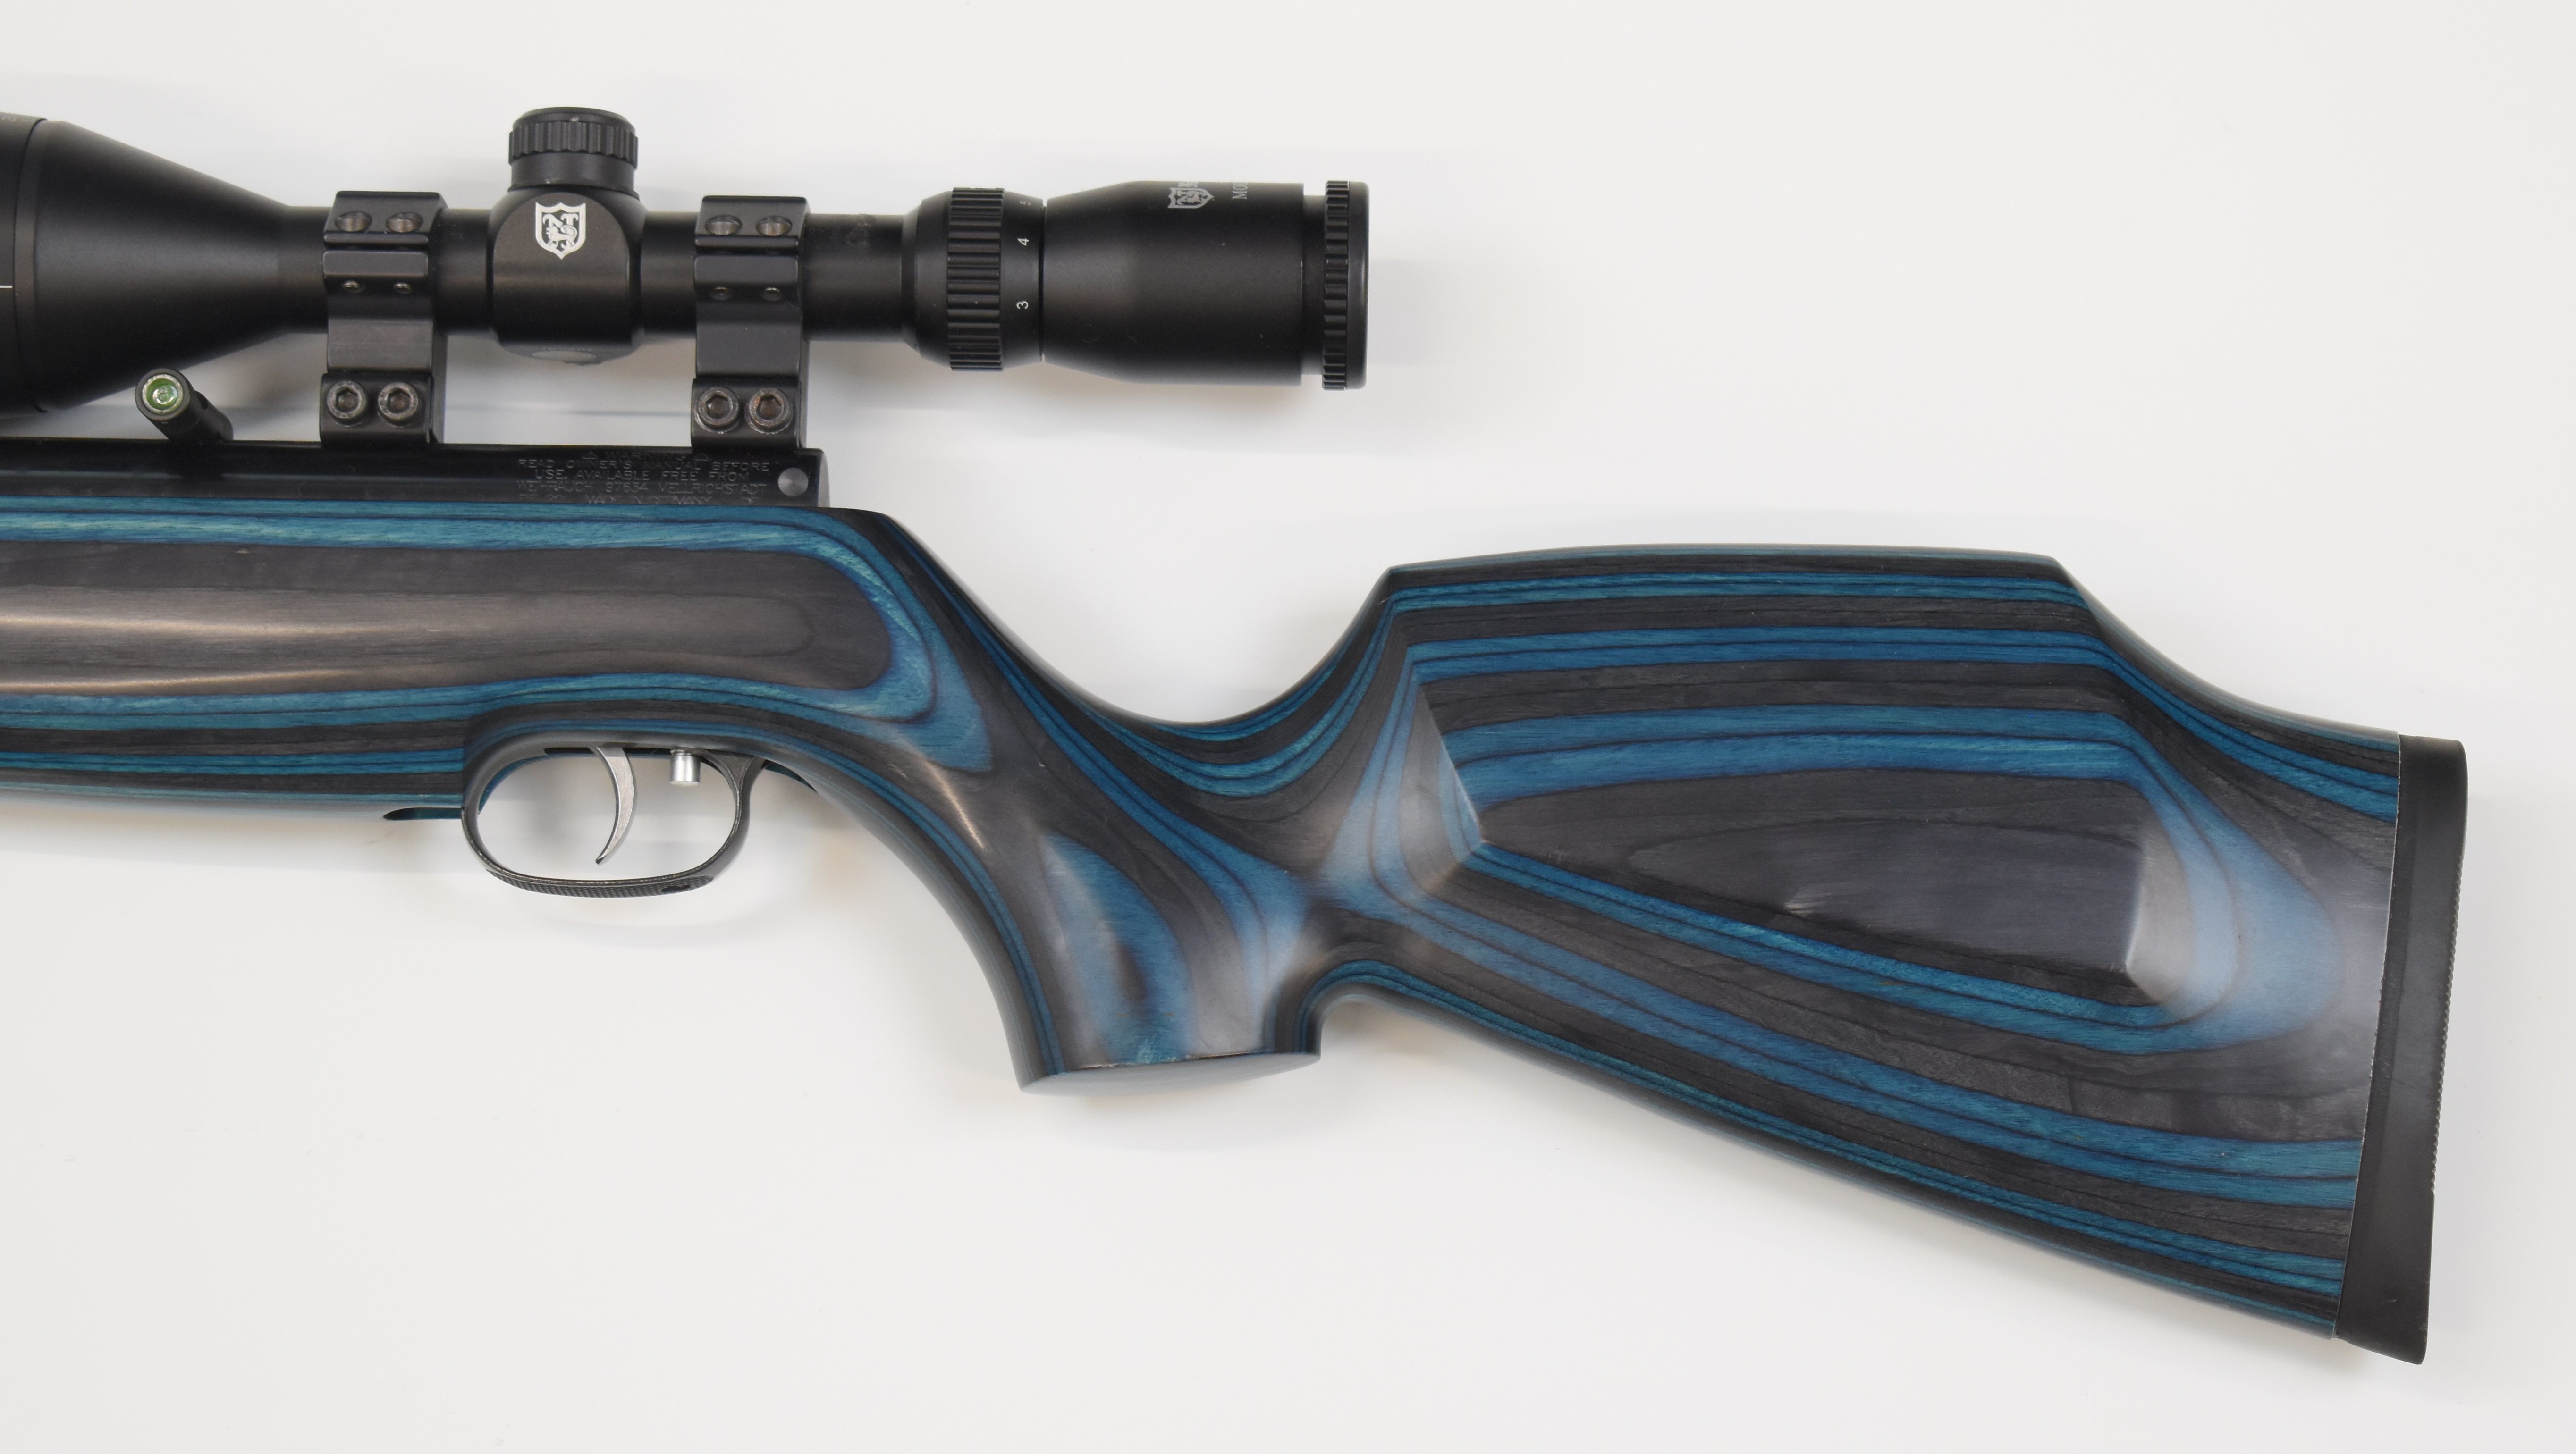 Weihrauch HW97K .22 underlever air rifle with blue laminated show wood stock, semi-pistol grip, - Image 7 of 10